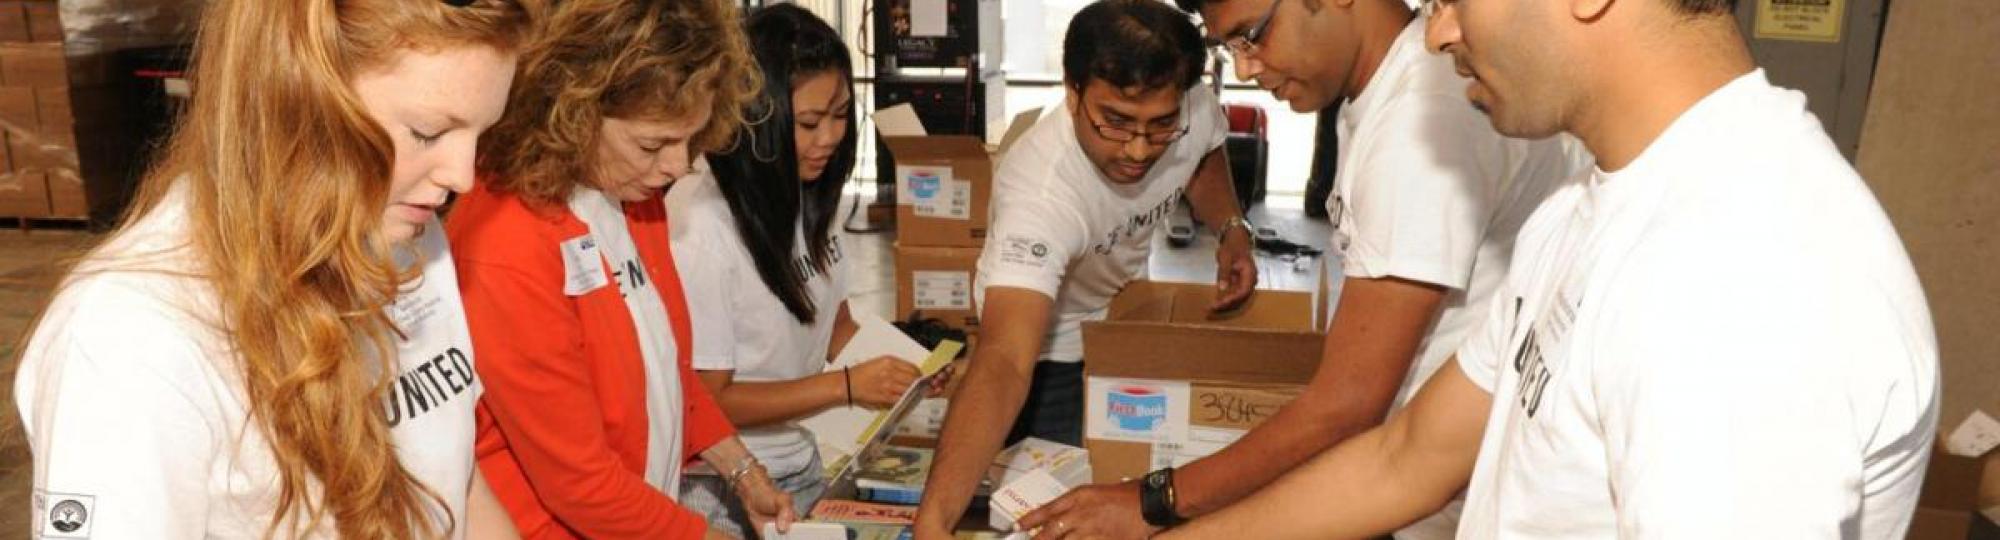 volunteers wear LIVE UNITED tshirts on eaither side of a table sorting books